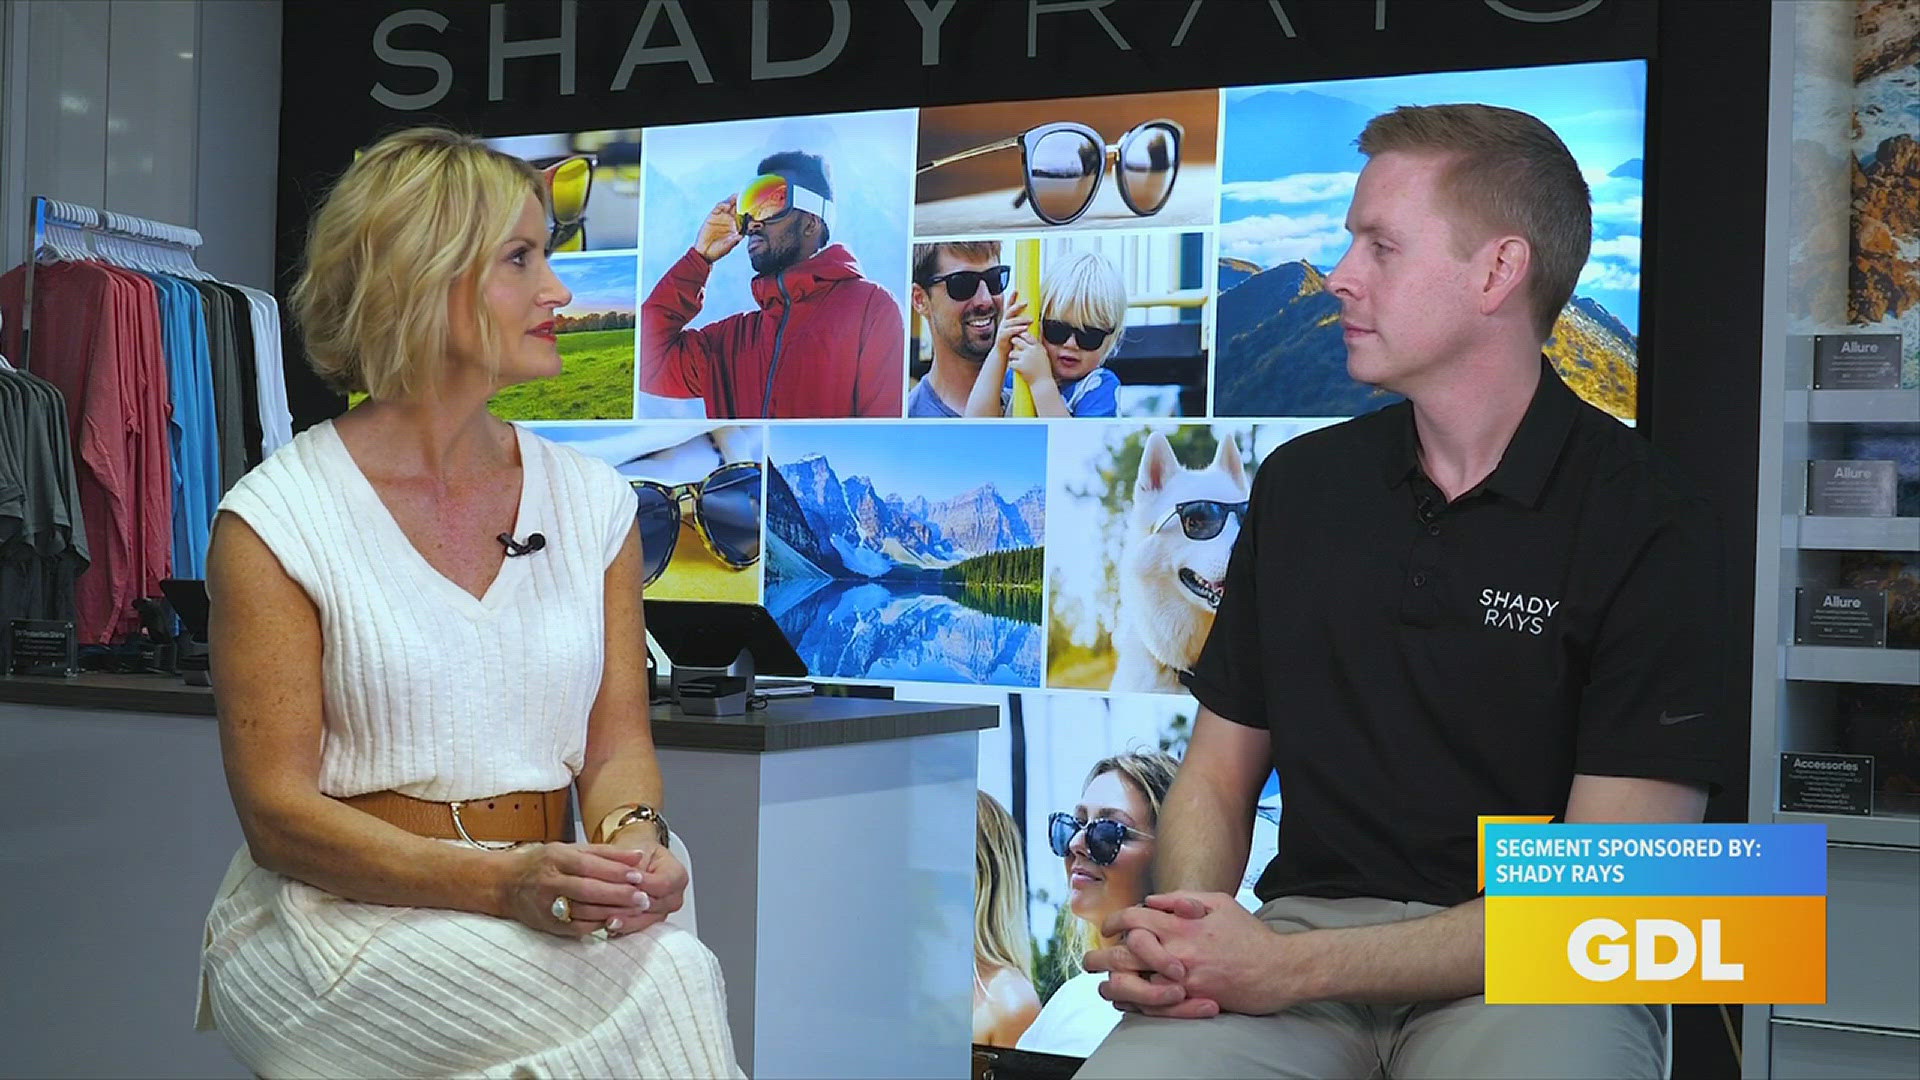 Founder and CEO of Shady Rays discusses how the company has grown and is reaching out the community.